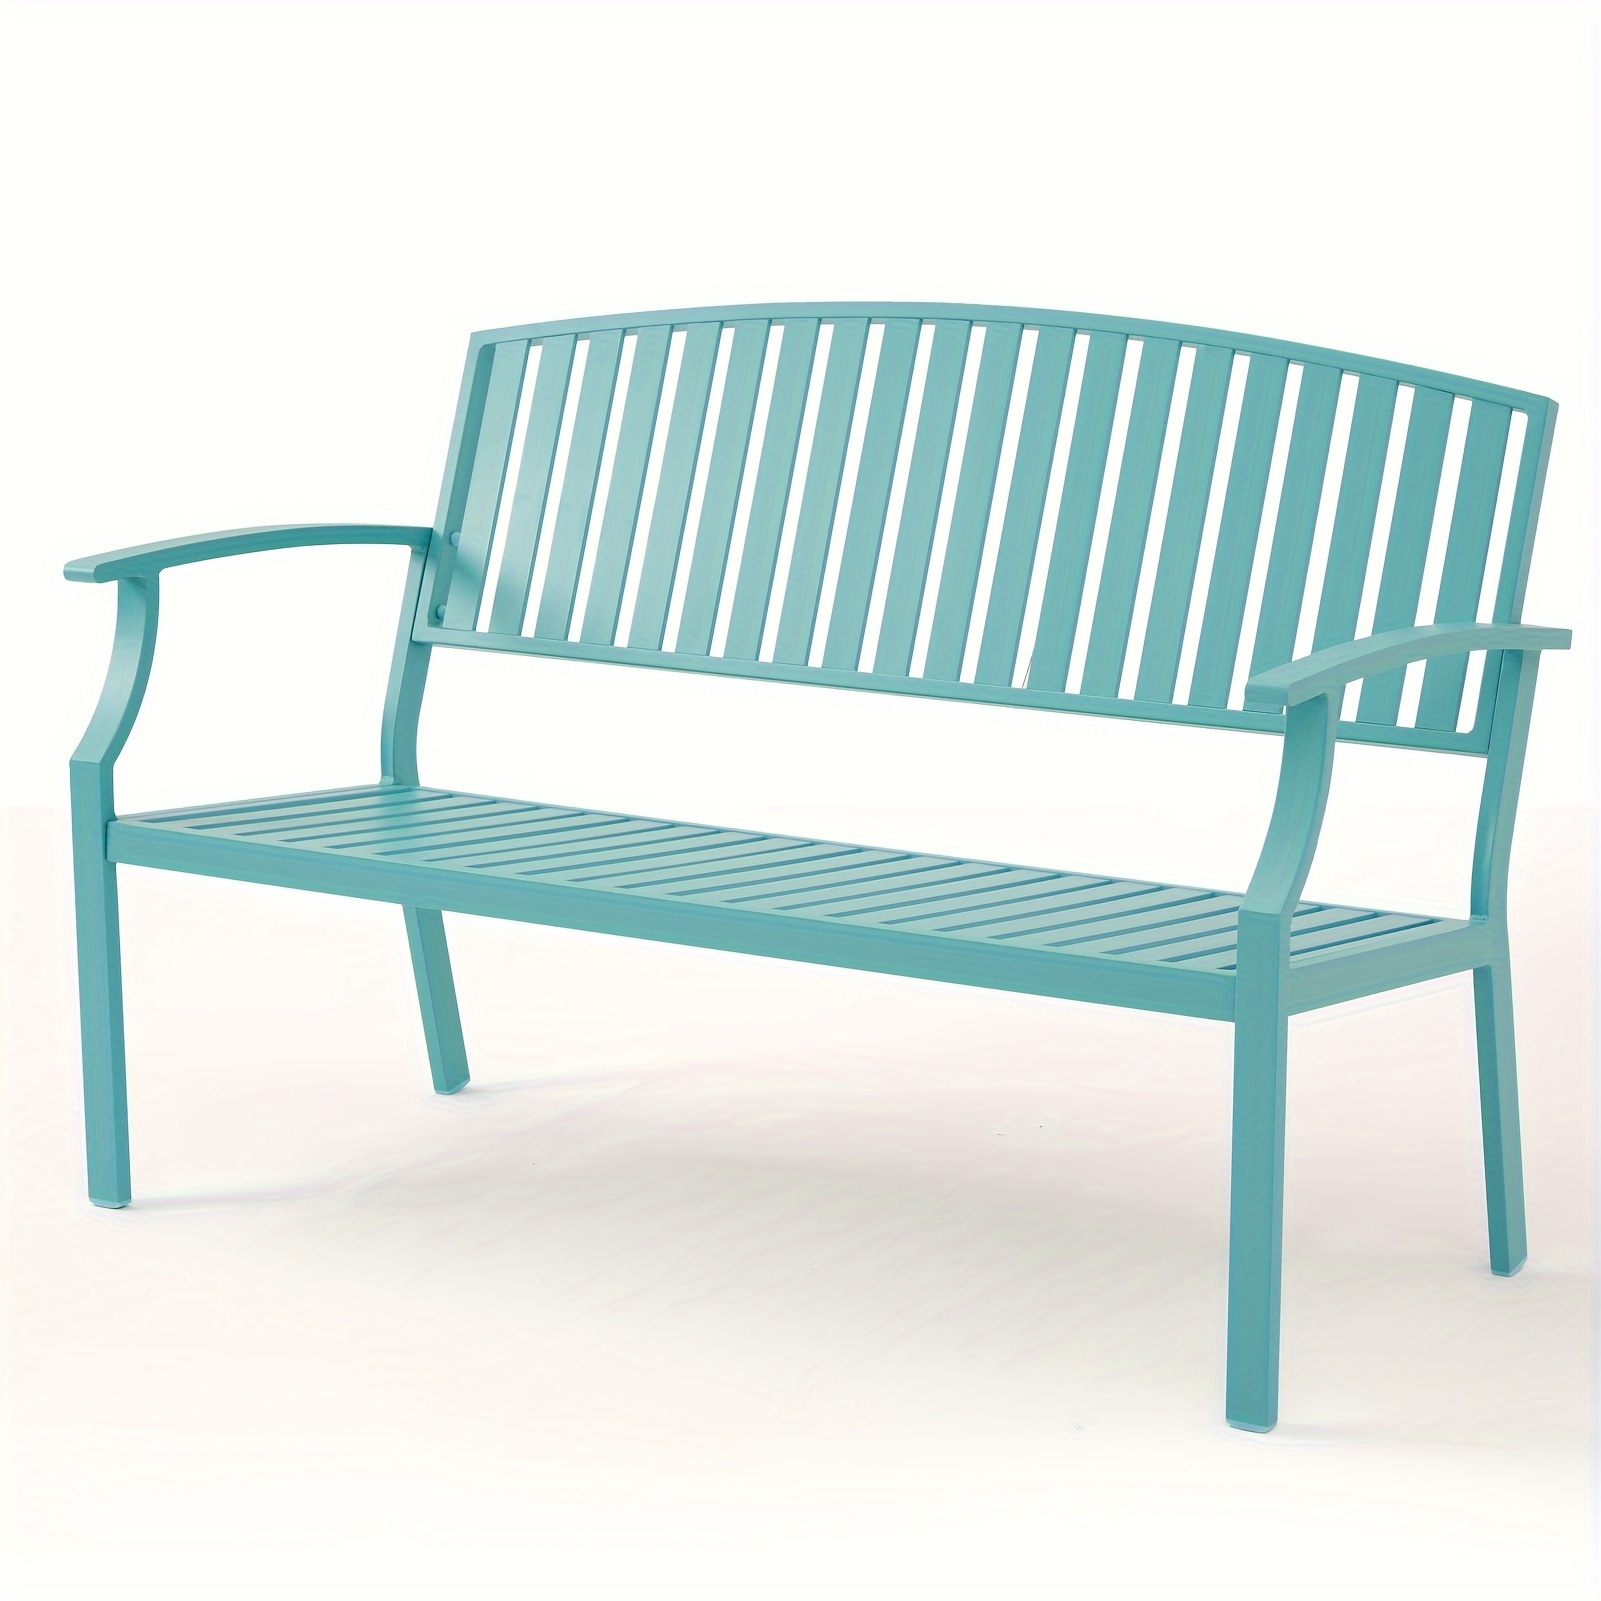 

Aluminum Outdoor Bench With Backrest, Patio Metal 3-seater Chair For Porch Balcony Deck Lawn Garden Poolside Yard (blue)